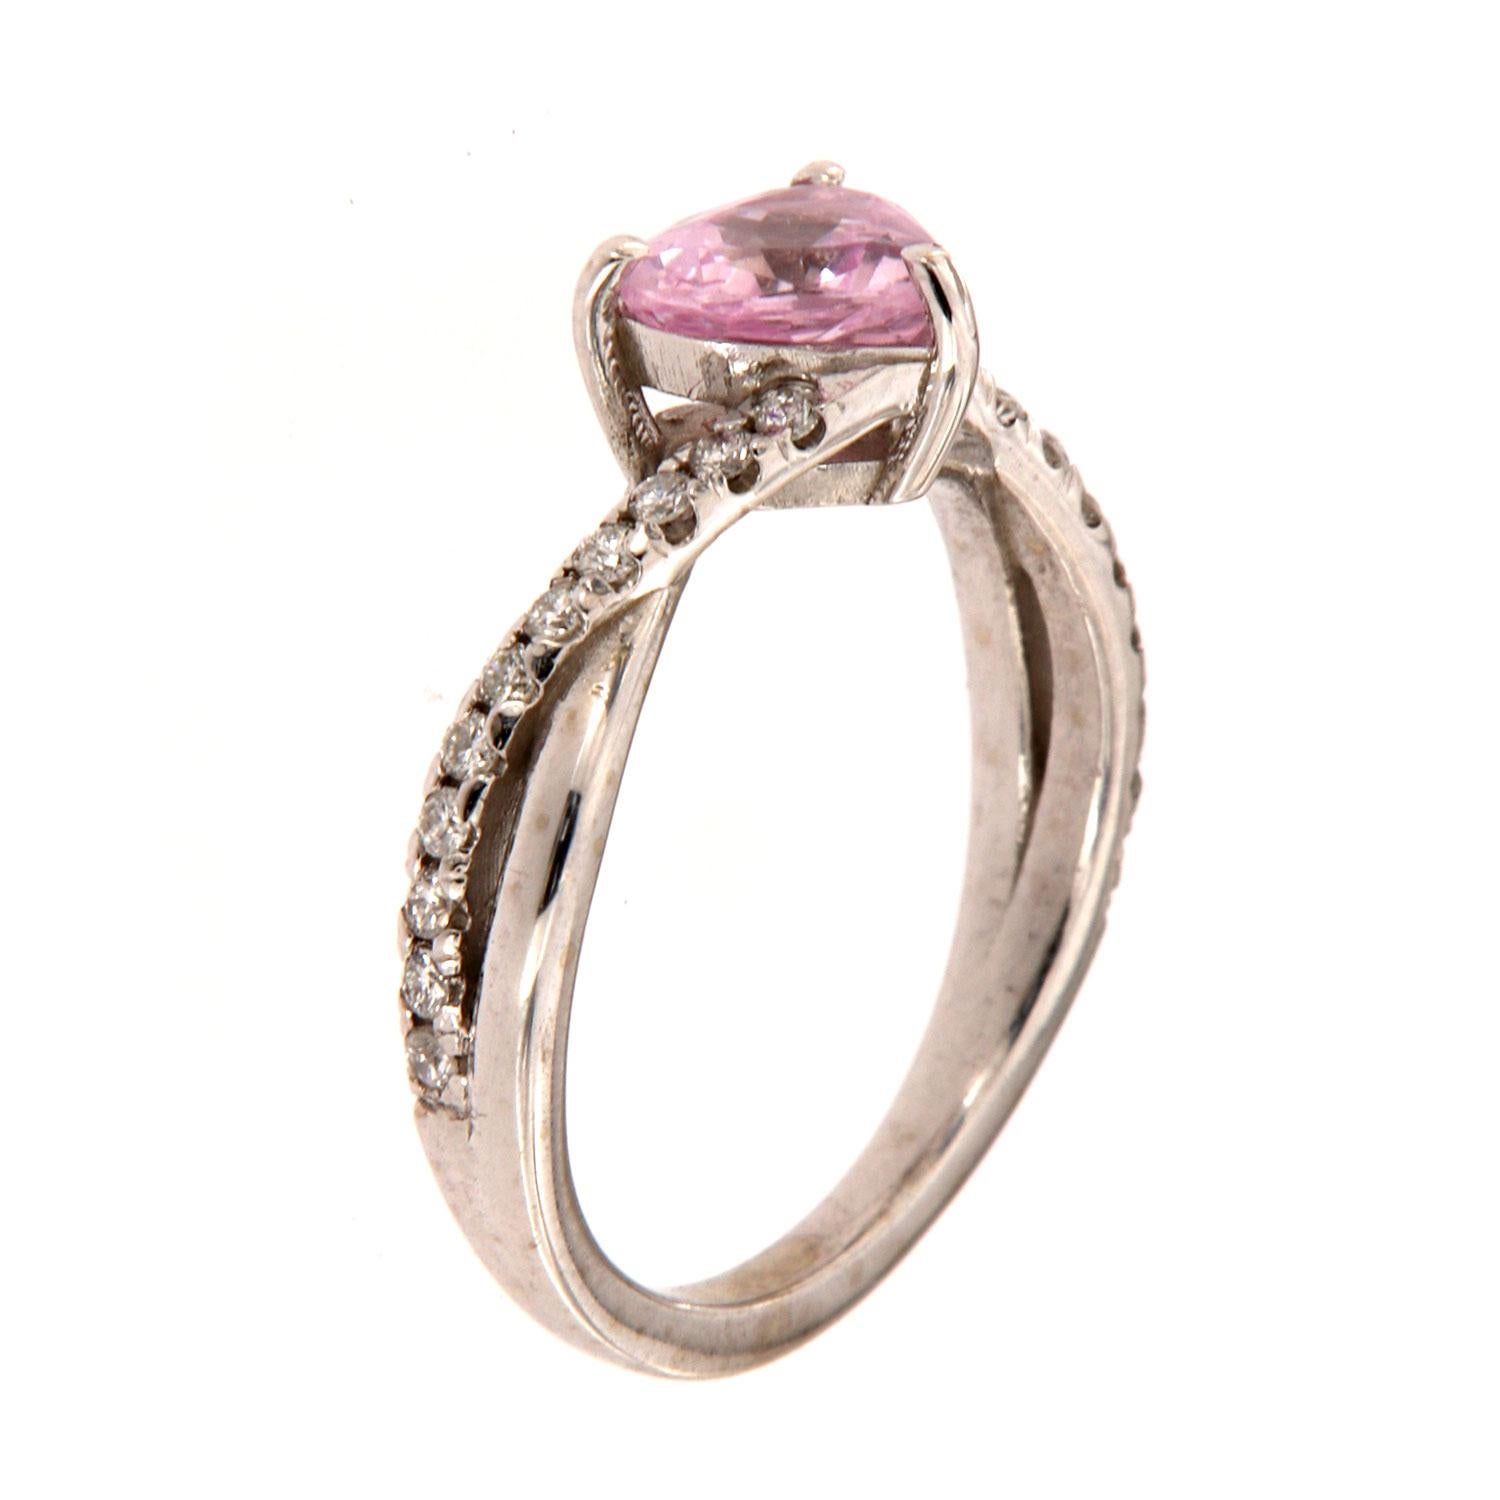 This ring features a 1.00 - carat Heart-Shape Non-Heated Sri-Lankan Sapphire three-prong set.  Two rows of diamonds wrapped around the Sapphire complete this delicate ring.  The diamond weight on the ring is 0.21 Carat.
The Sapphire exhibits Pinkish